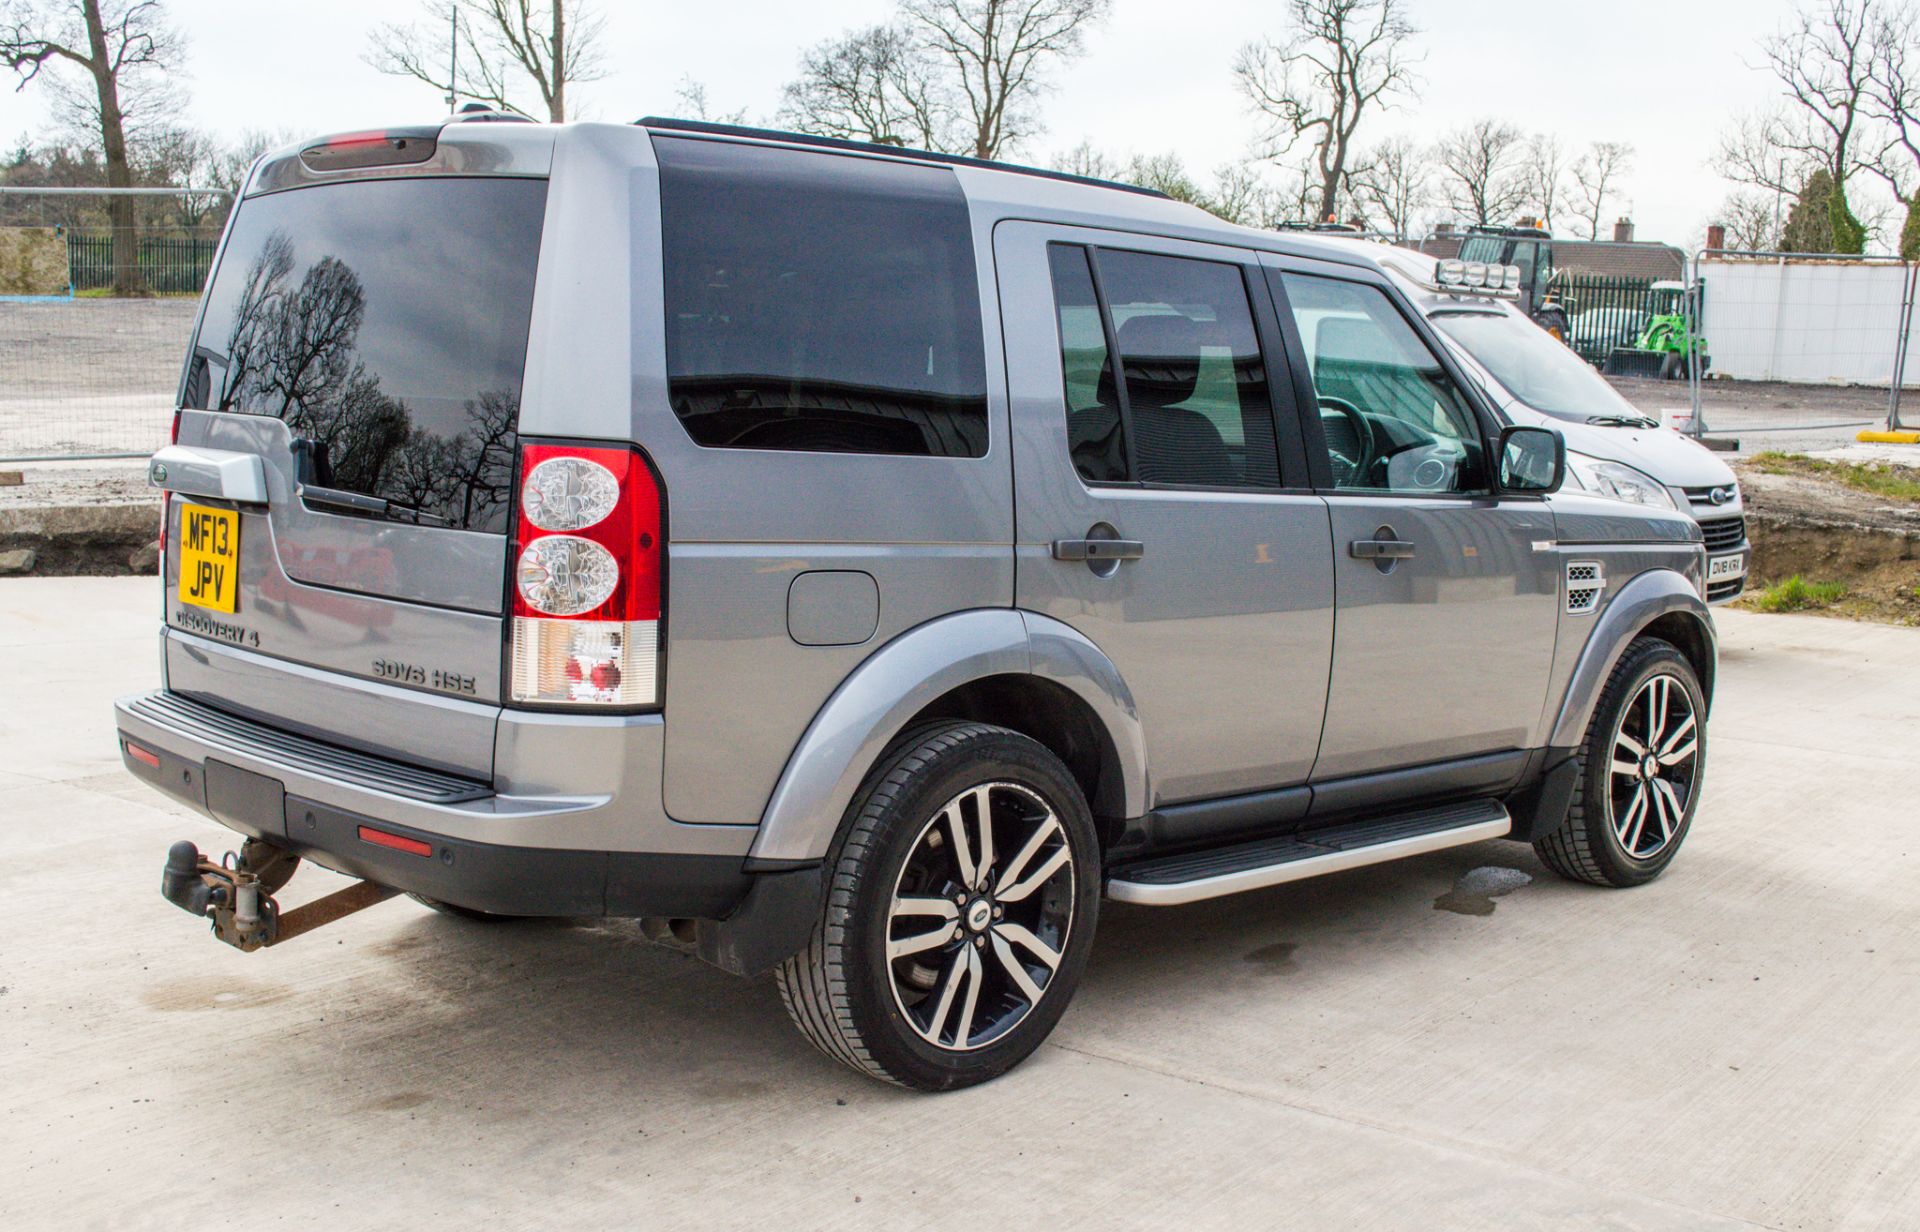 Land Rover Discovery 4 HSE SDV6 3.0 diesel automatic estate car - Image 3 of 32